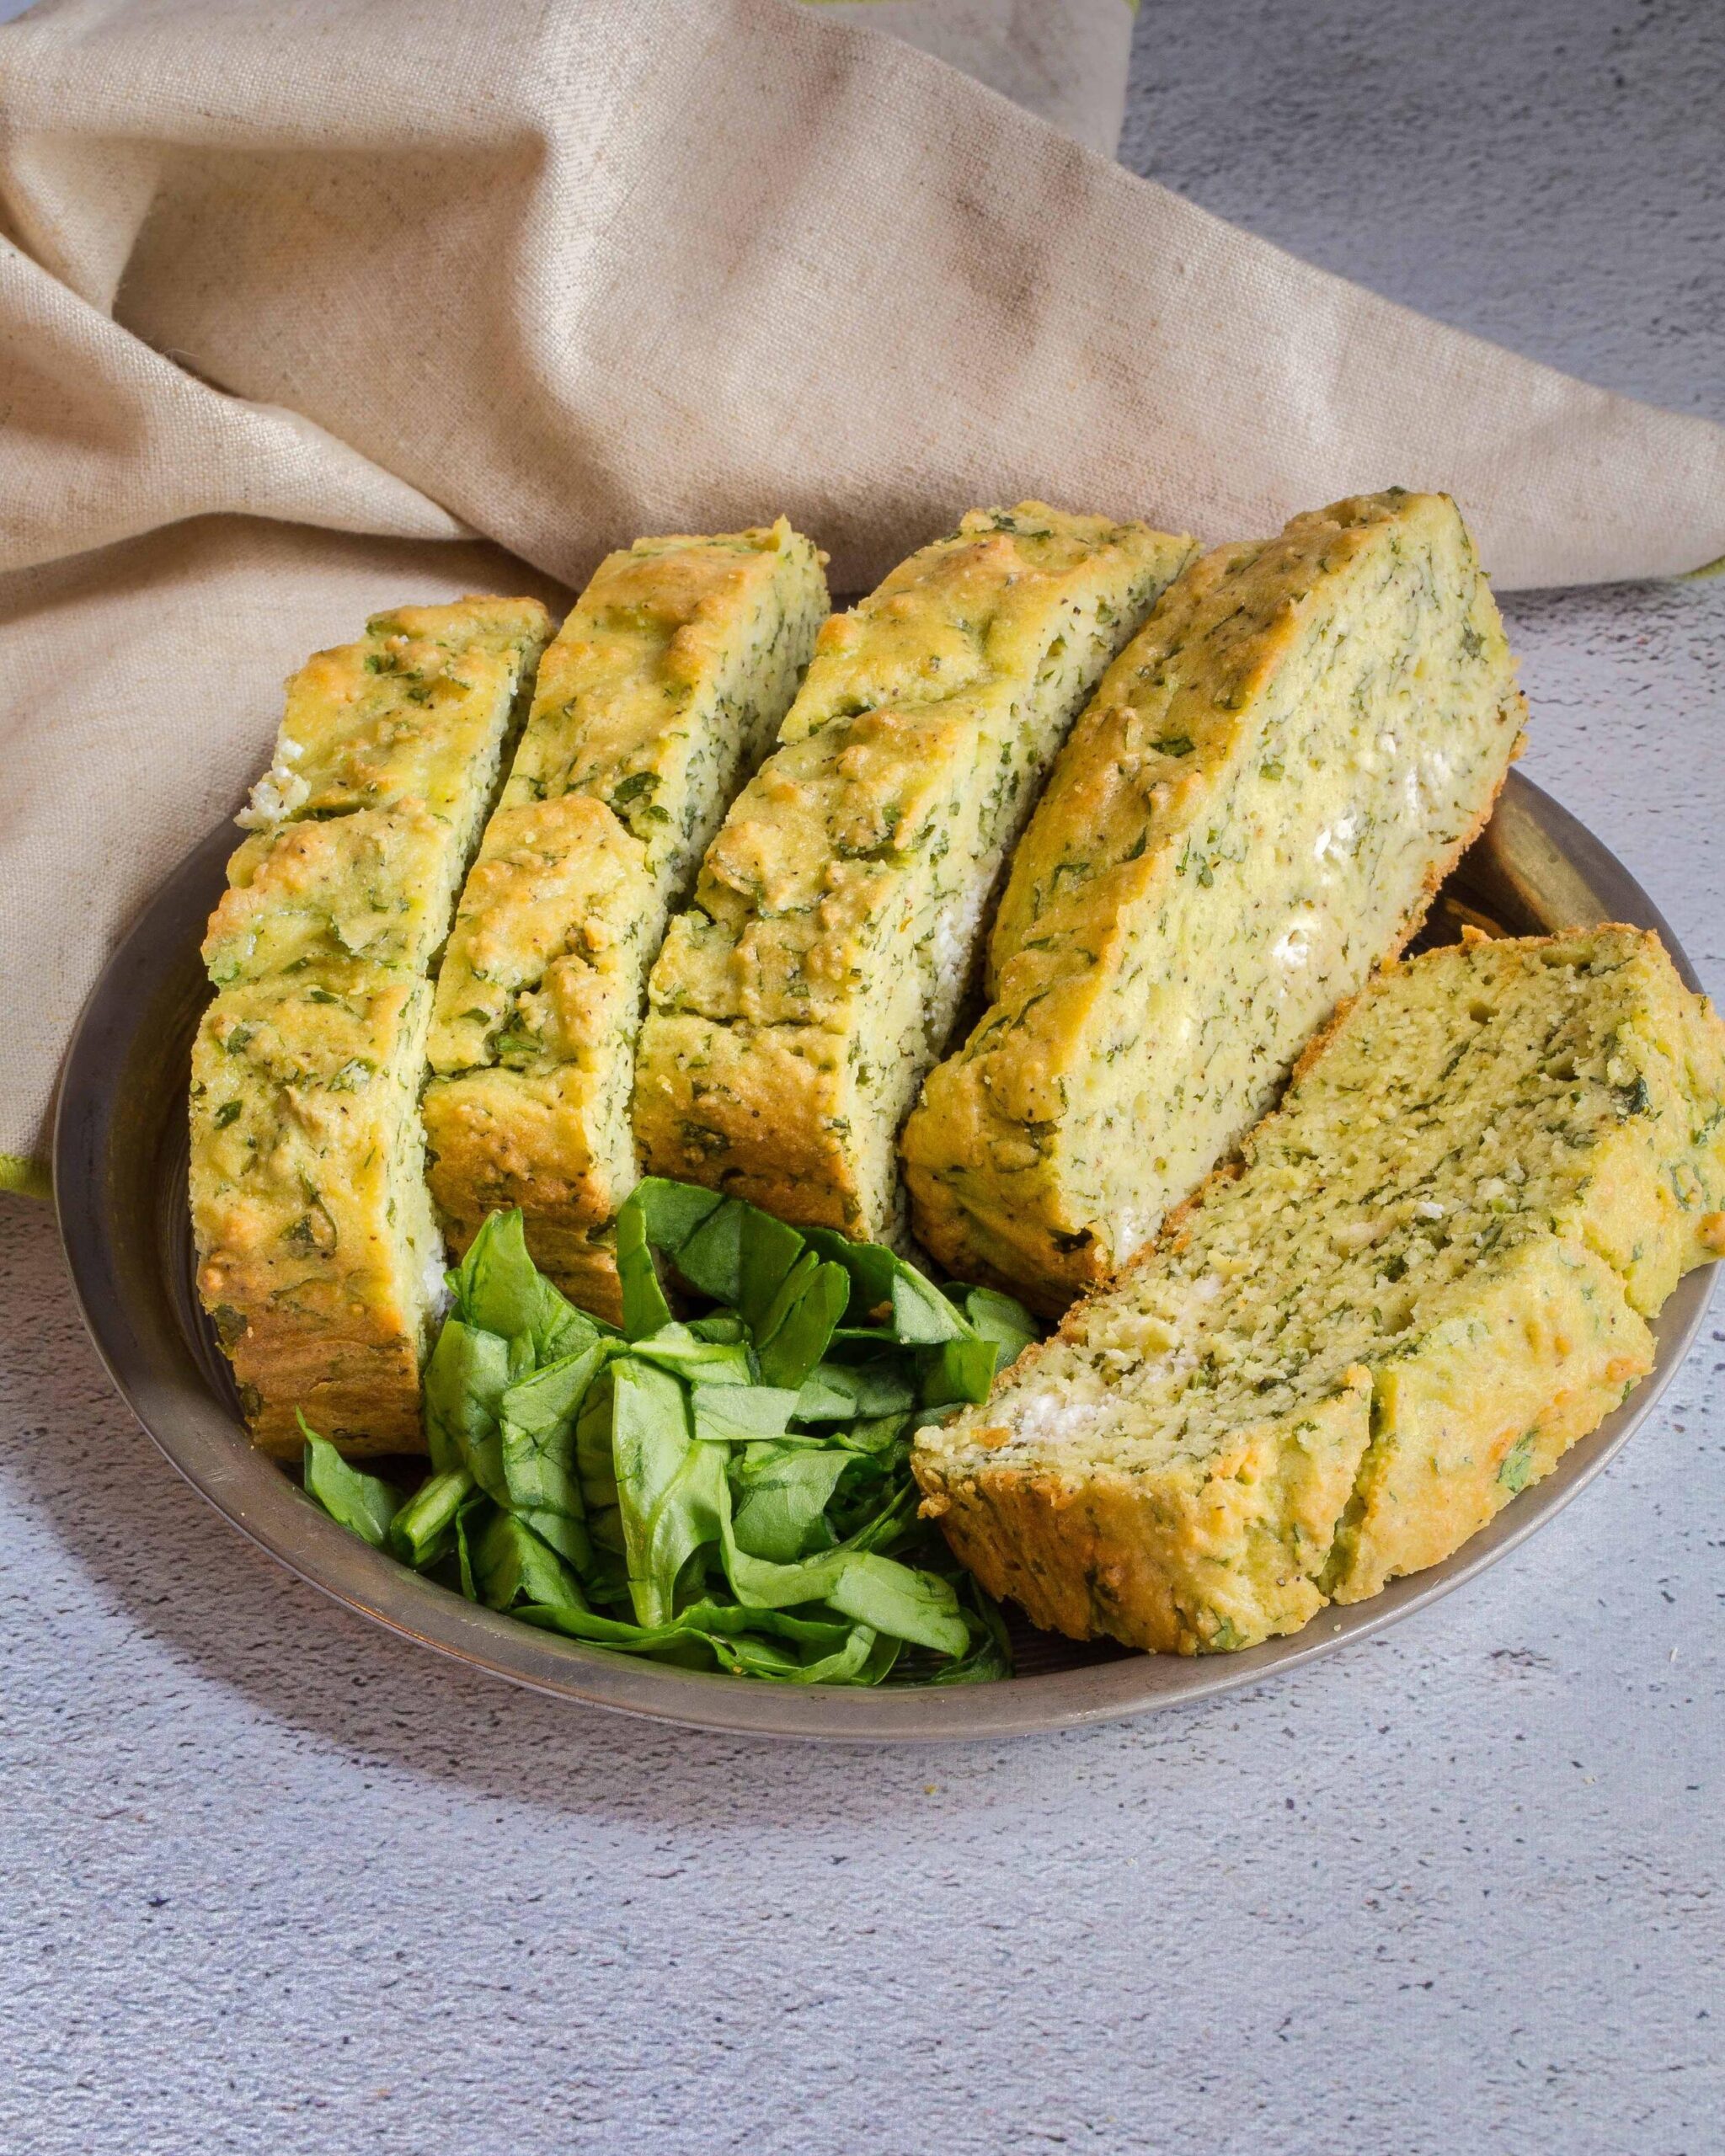  A slice of this homemade spinach bread is like a warm hug on a chilly day.